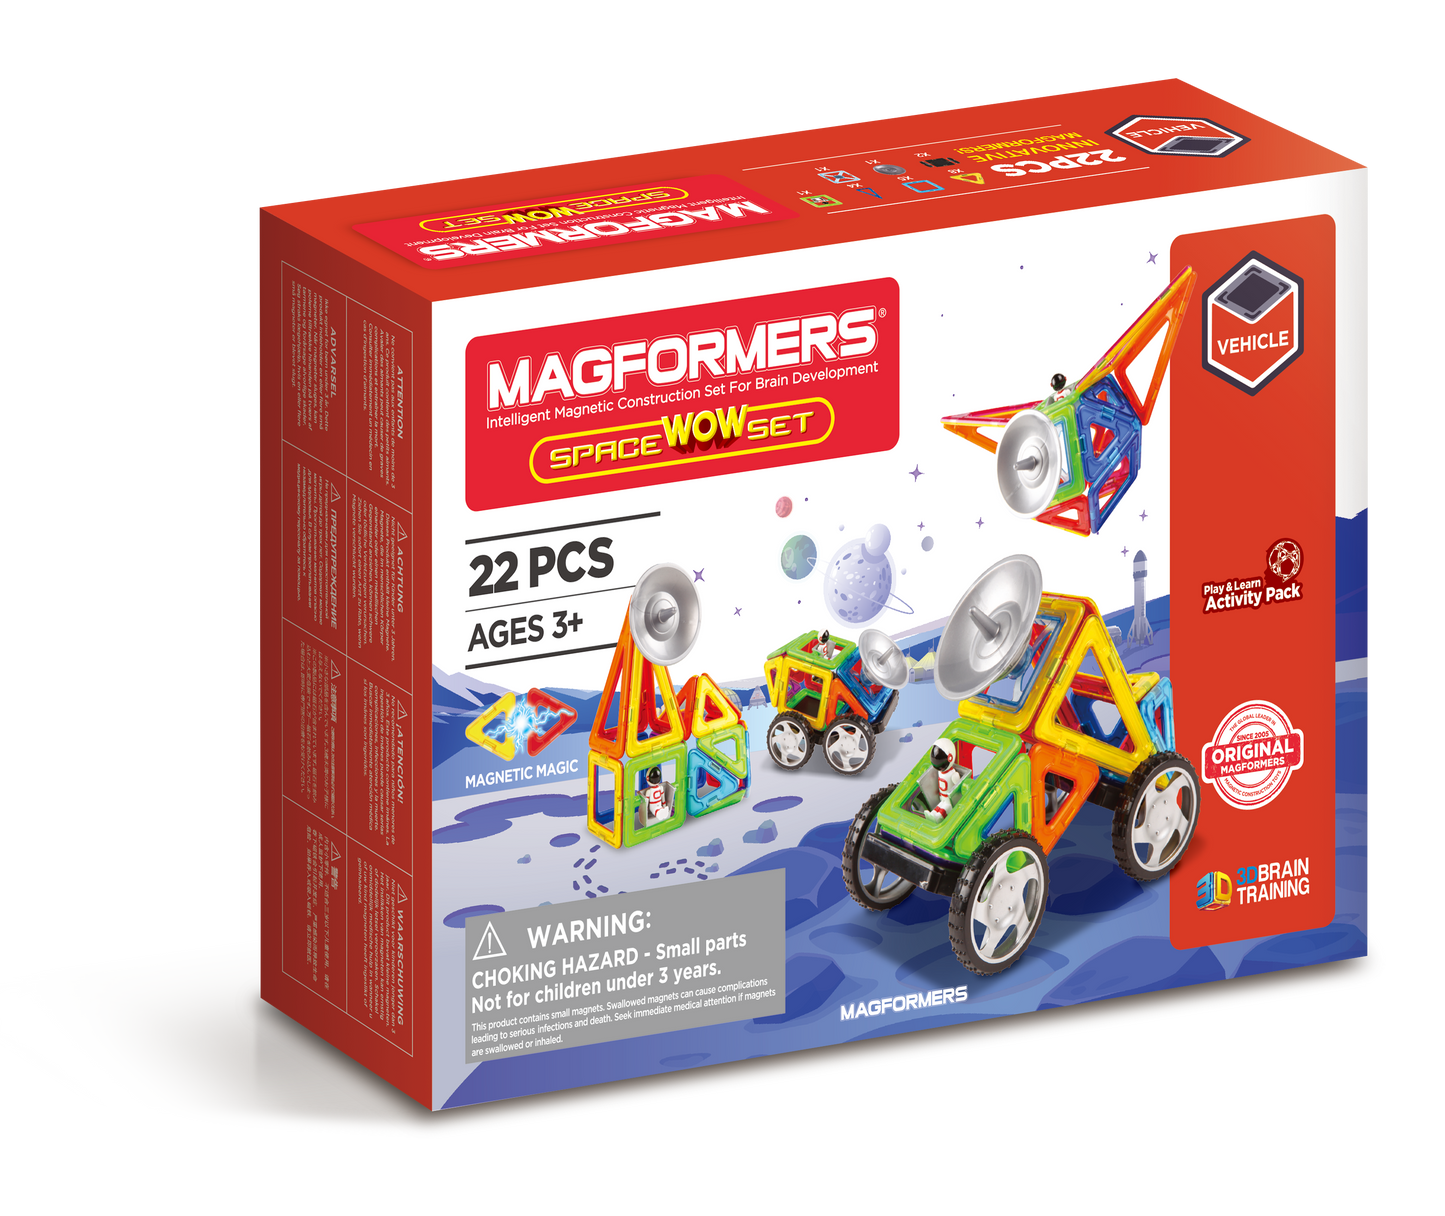 274-67 Magformers Space Wow Set